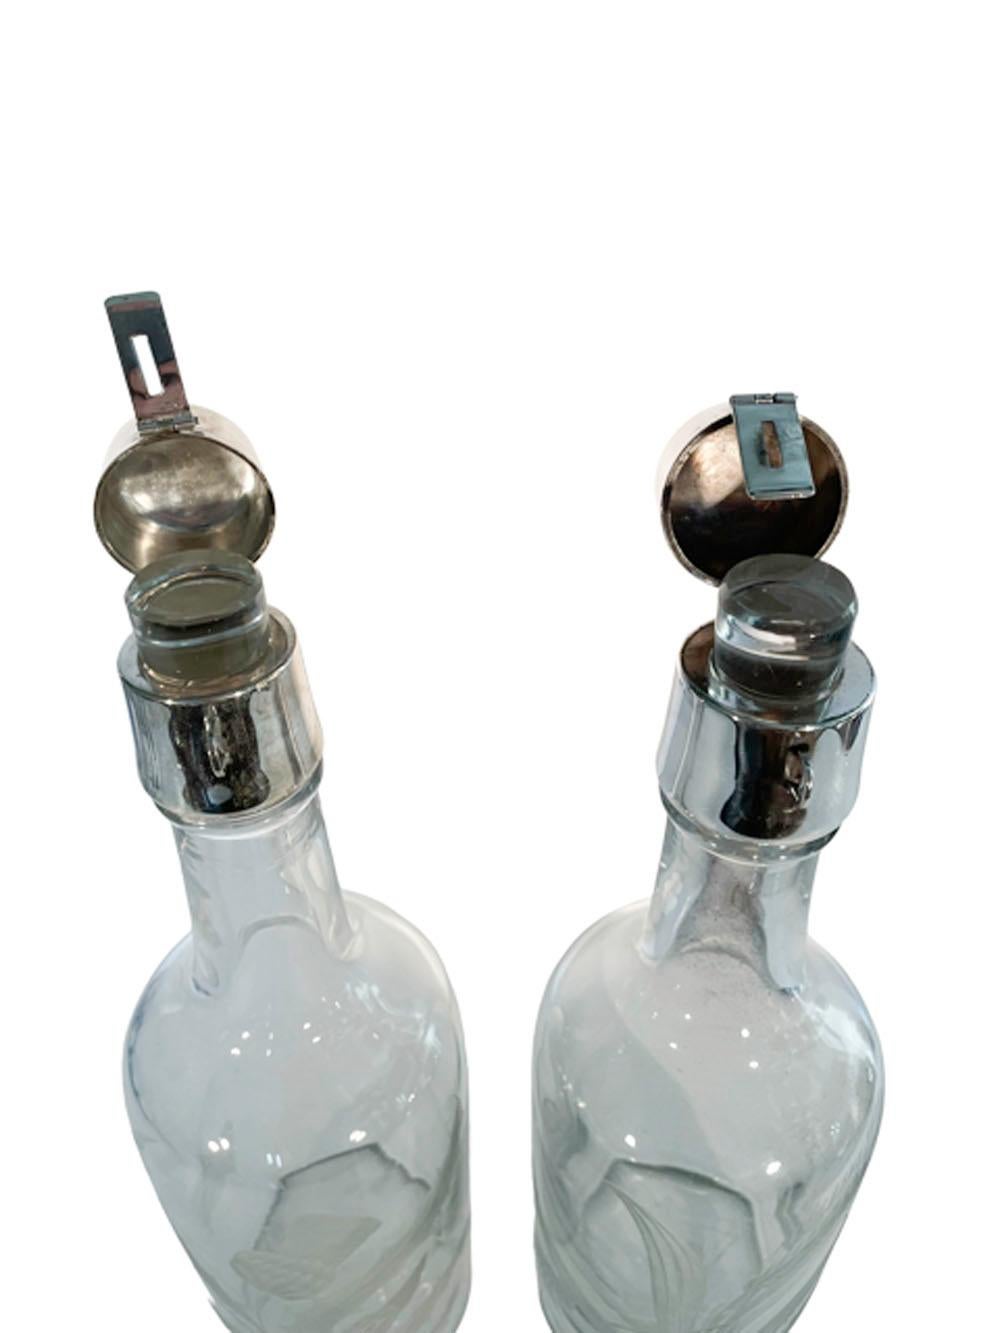 Art Deco Pair of Sterling Silver Mounted Locking Liquor Bottles by T.G. Hawkes